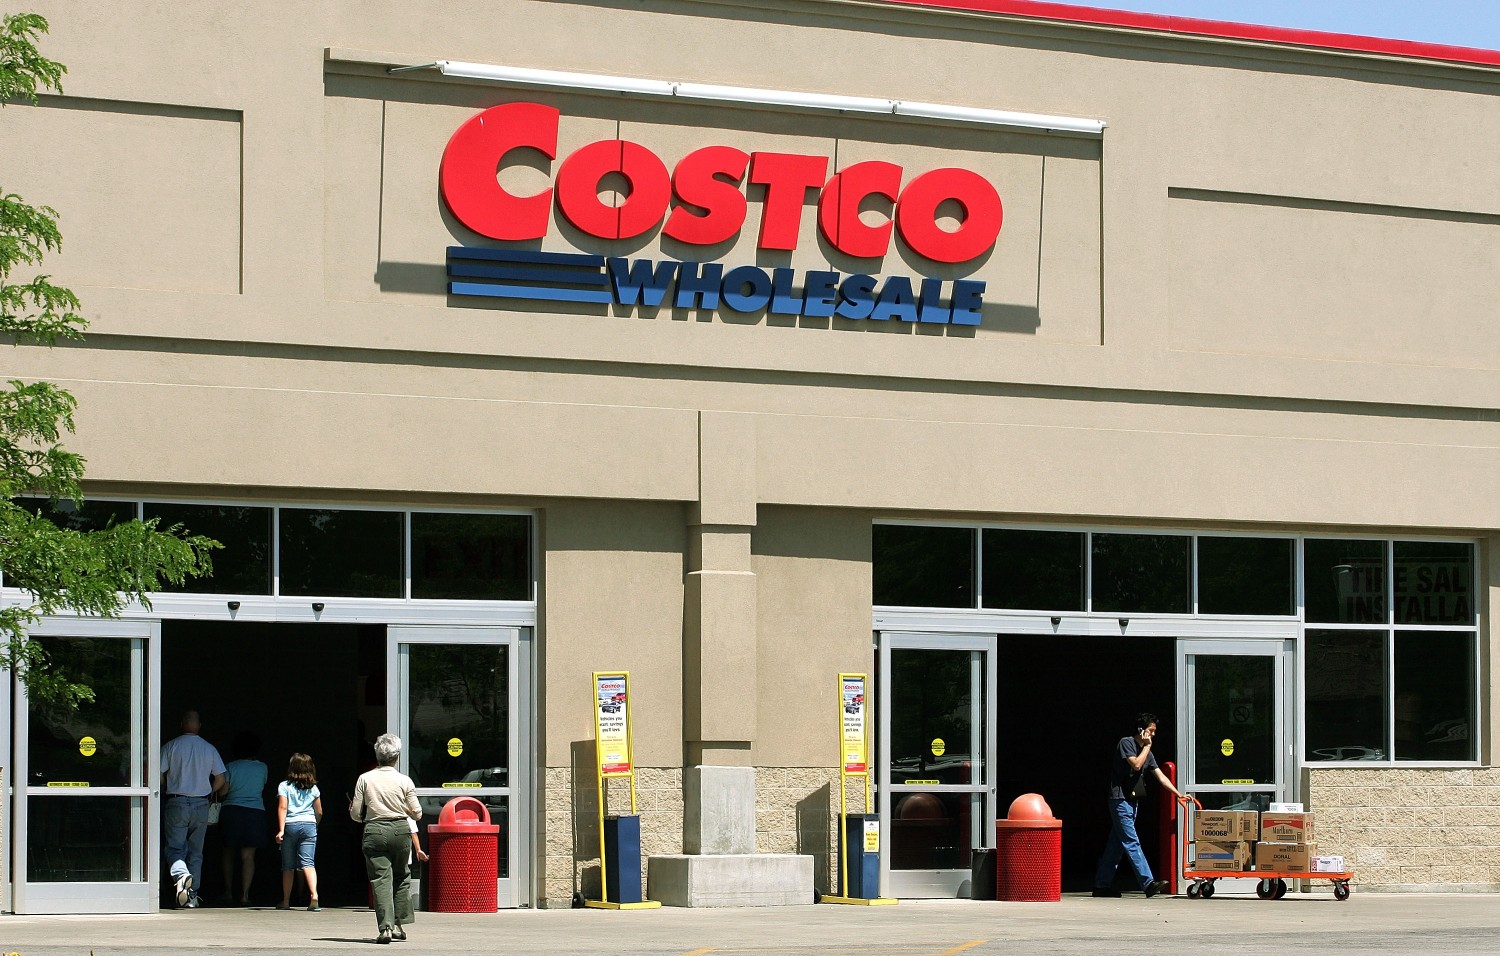 how much do you save with costco auto buying program